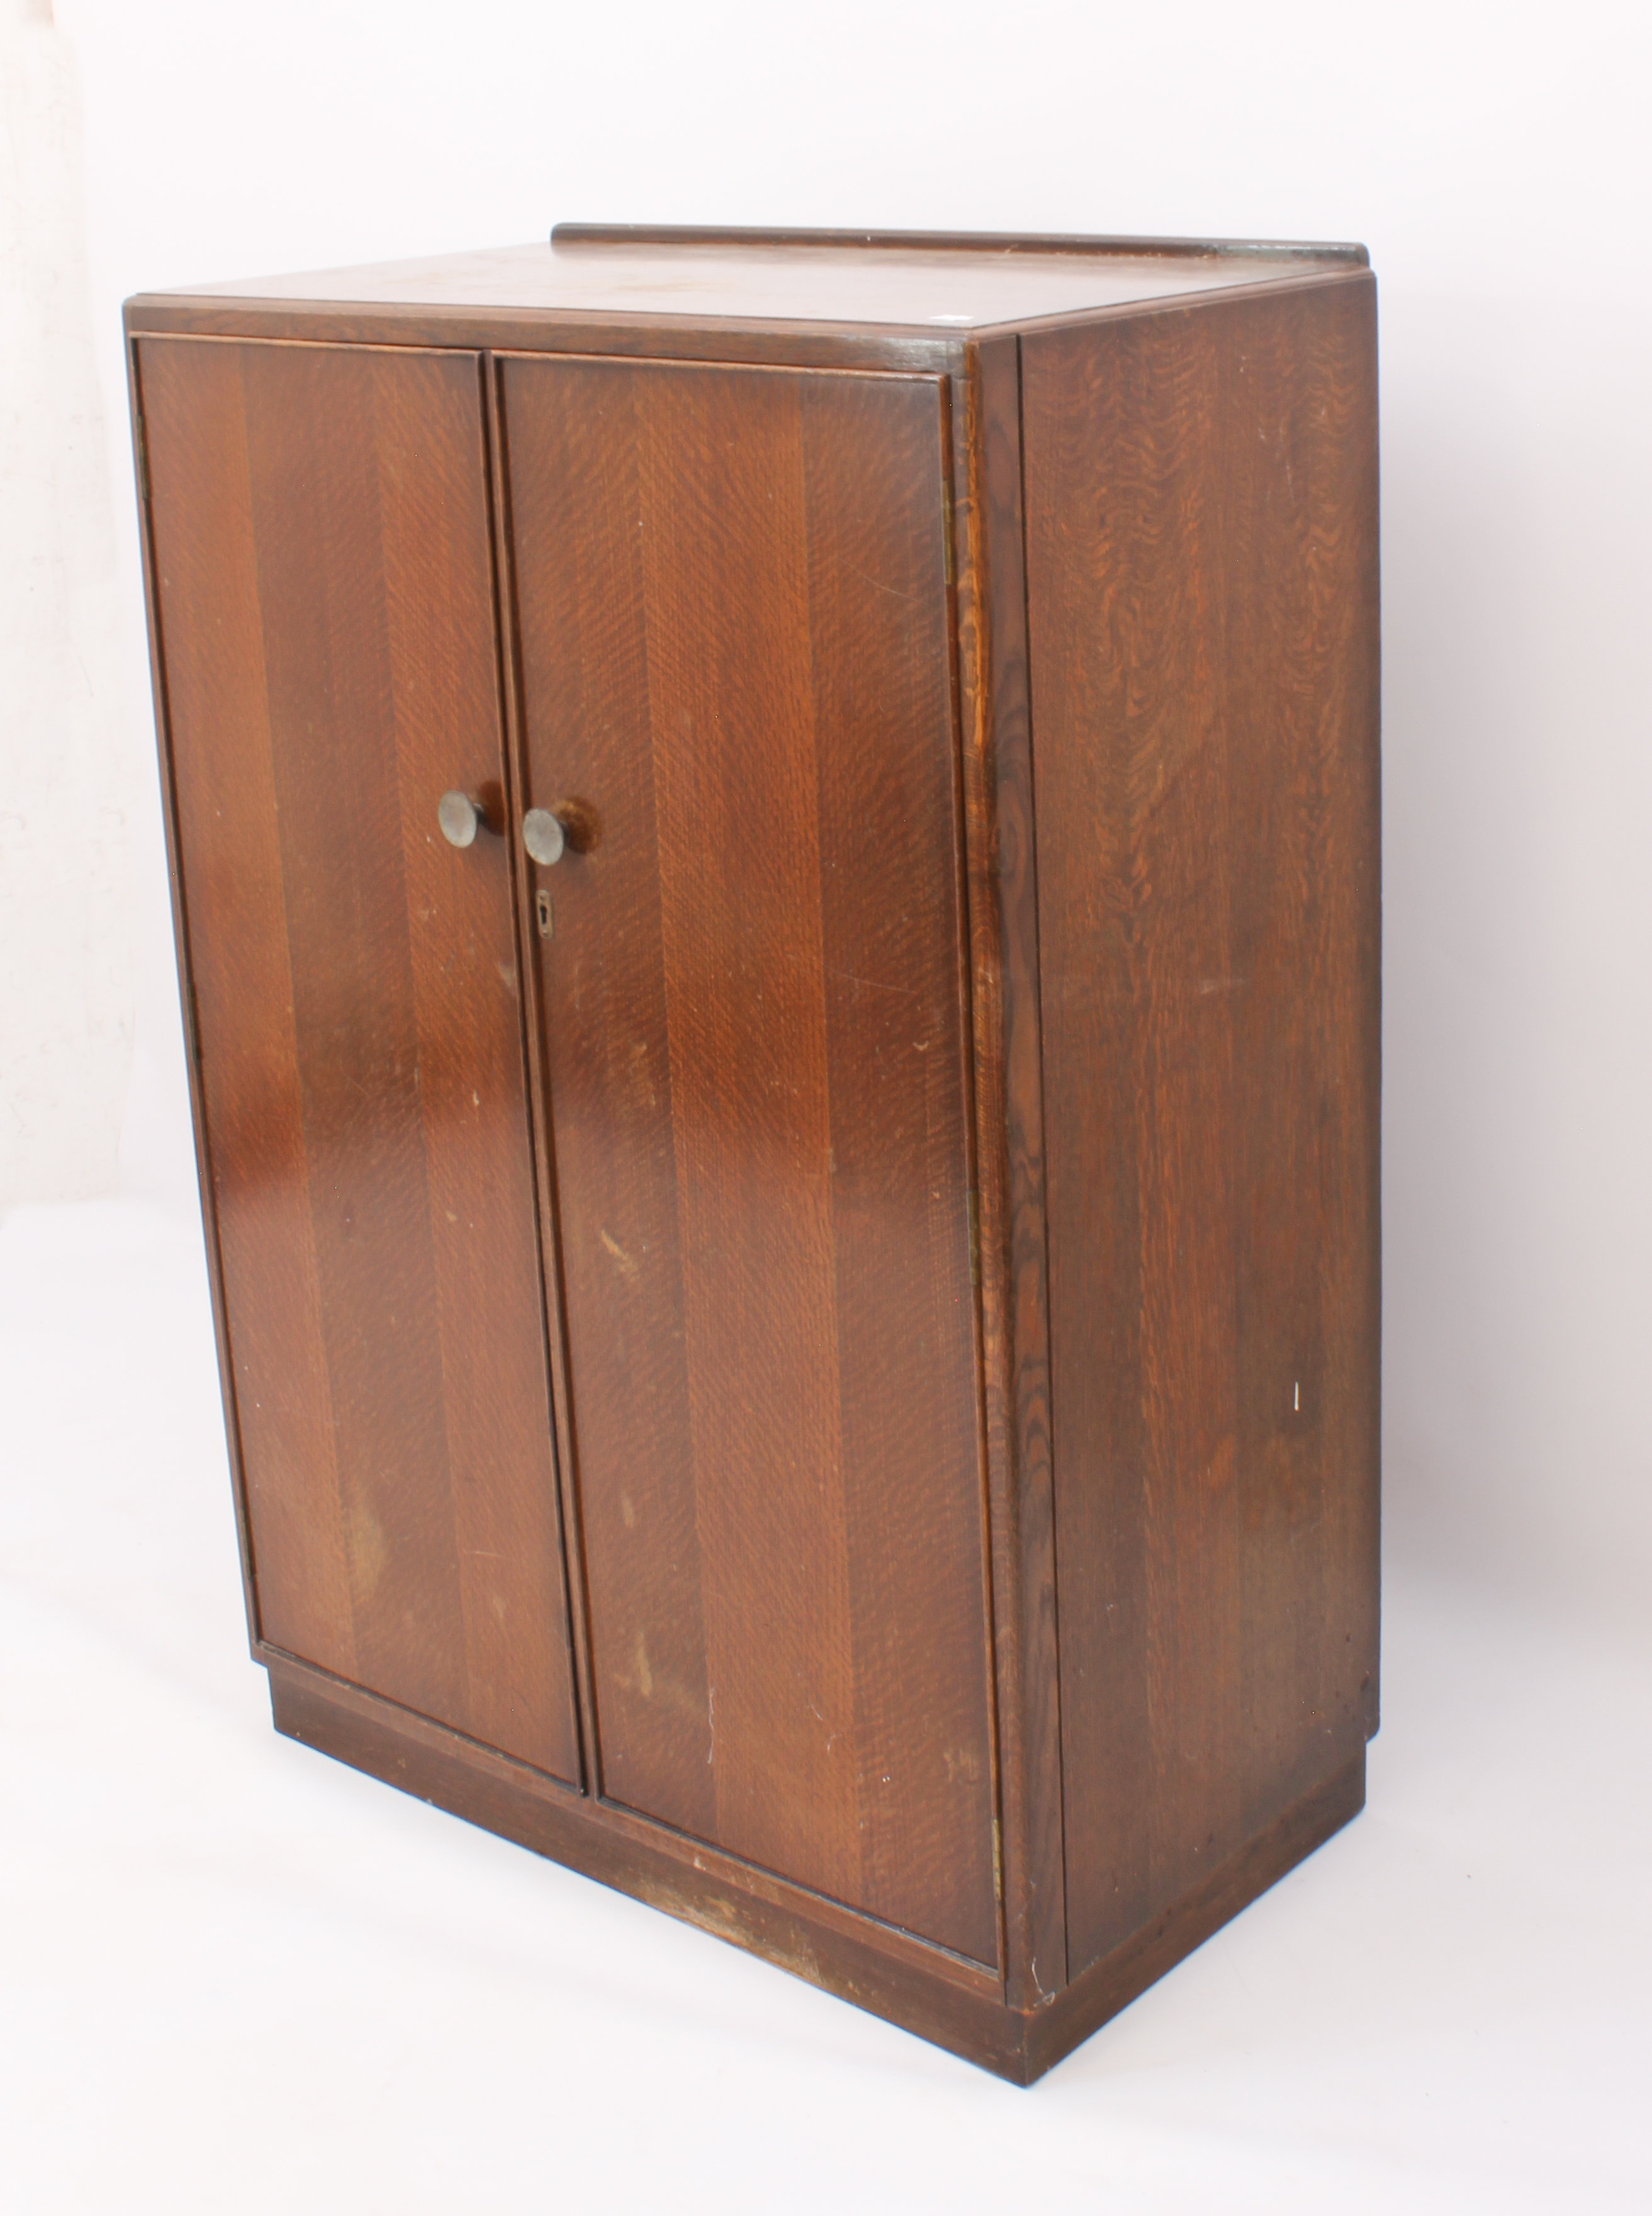 A 1940s-50s oak child's compactum wardrobe - striped veneered doors and inset plinth base, the - Image 3 of 3